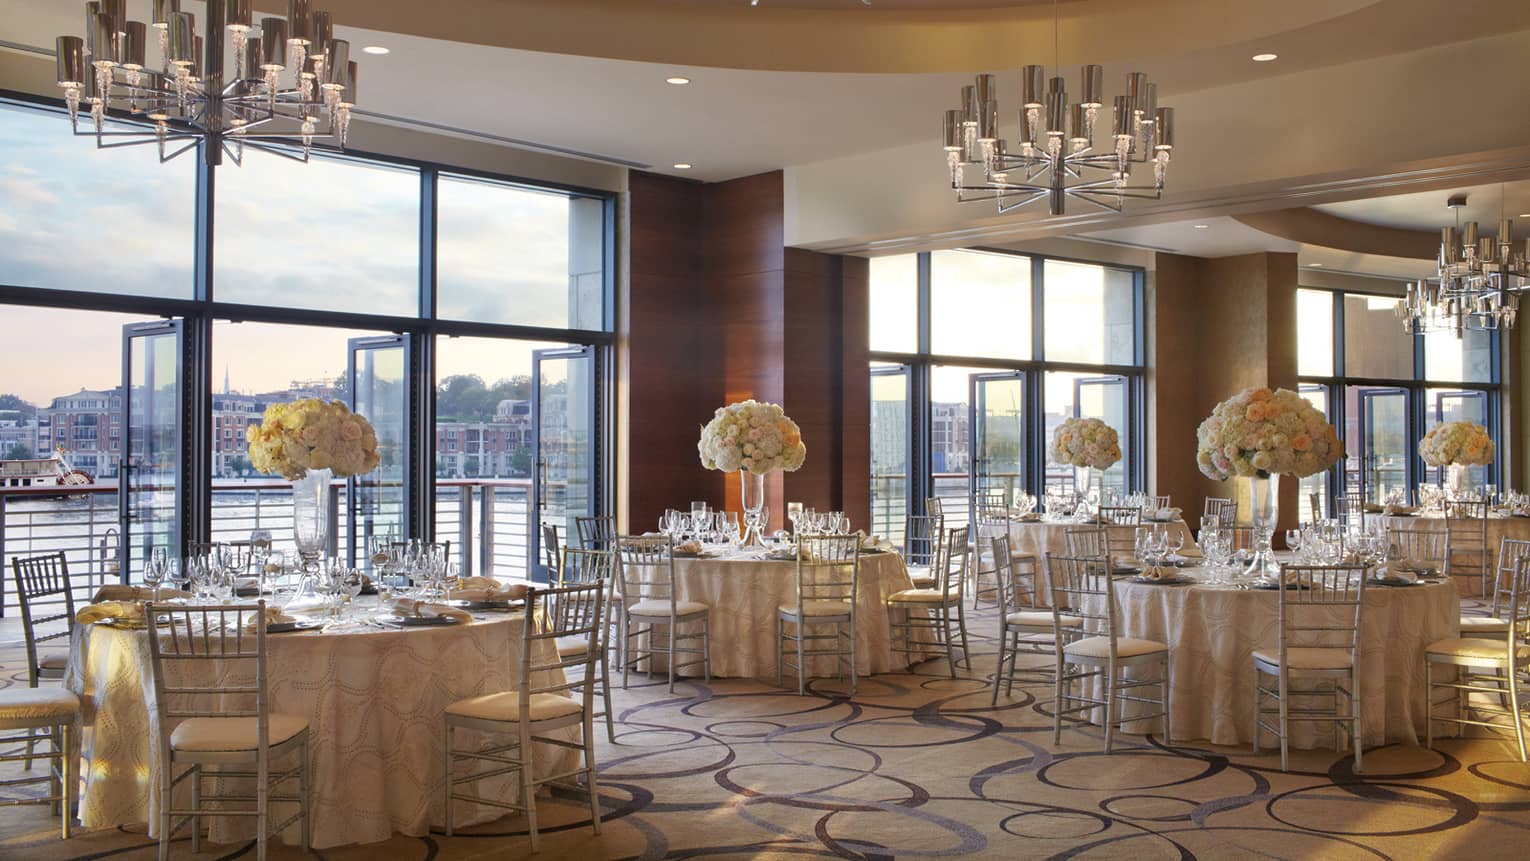 Ballroom with elegant round banquet tables by open air floor-to-ceiling windows overlooking Harbor East water